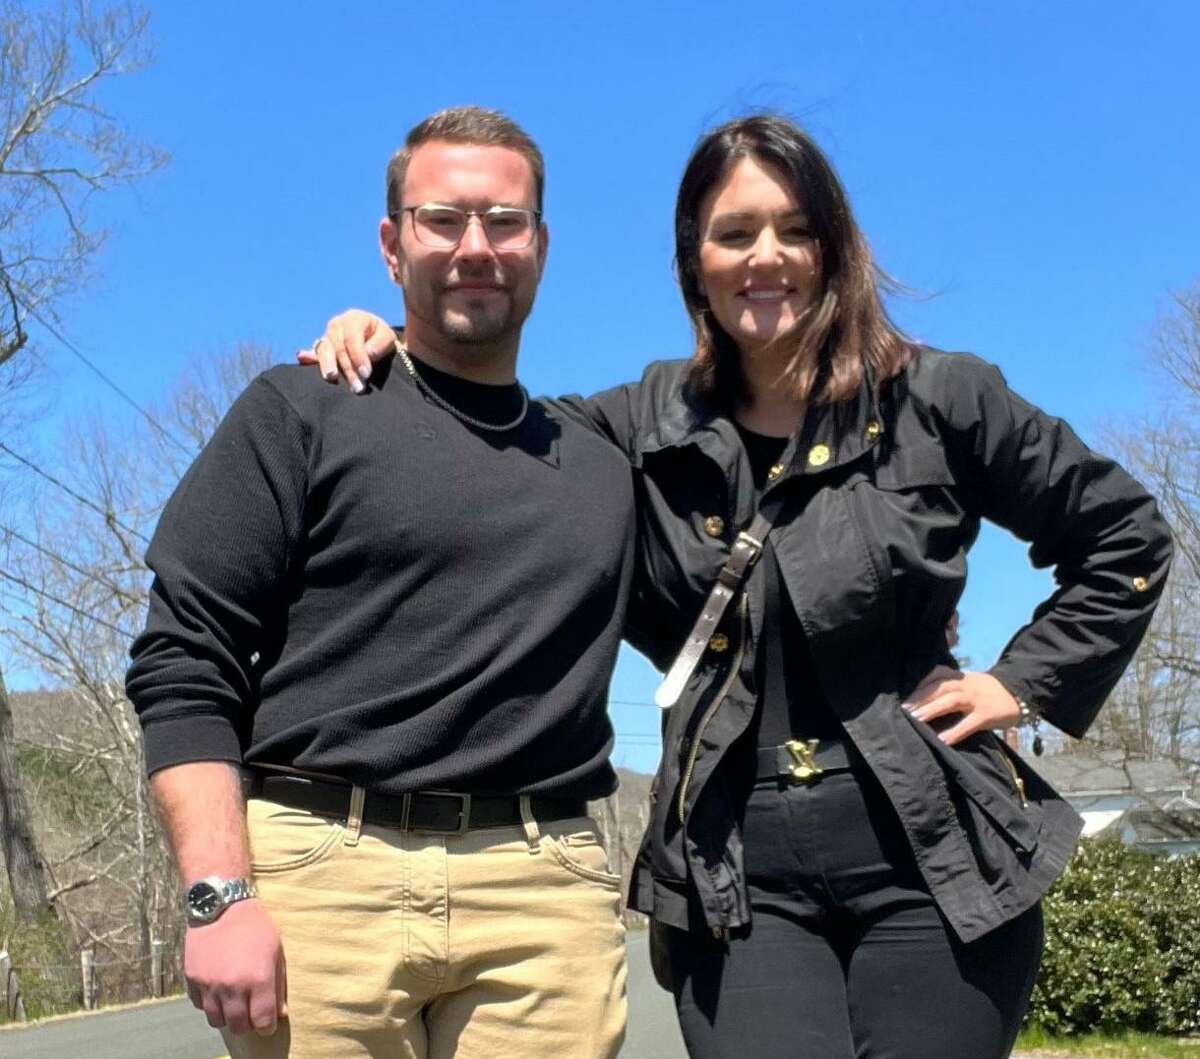 Derek J. Savoy is pictured with Lauren Iraeta, leader of the Lauren Sells Team at Keller Williams Legacy Partners on South Main Street, West Hartford. The team is participating in Torrington’s Home Event May 7, organized by Savoy.